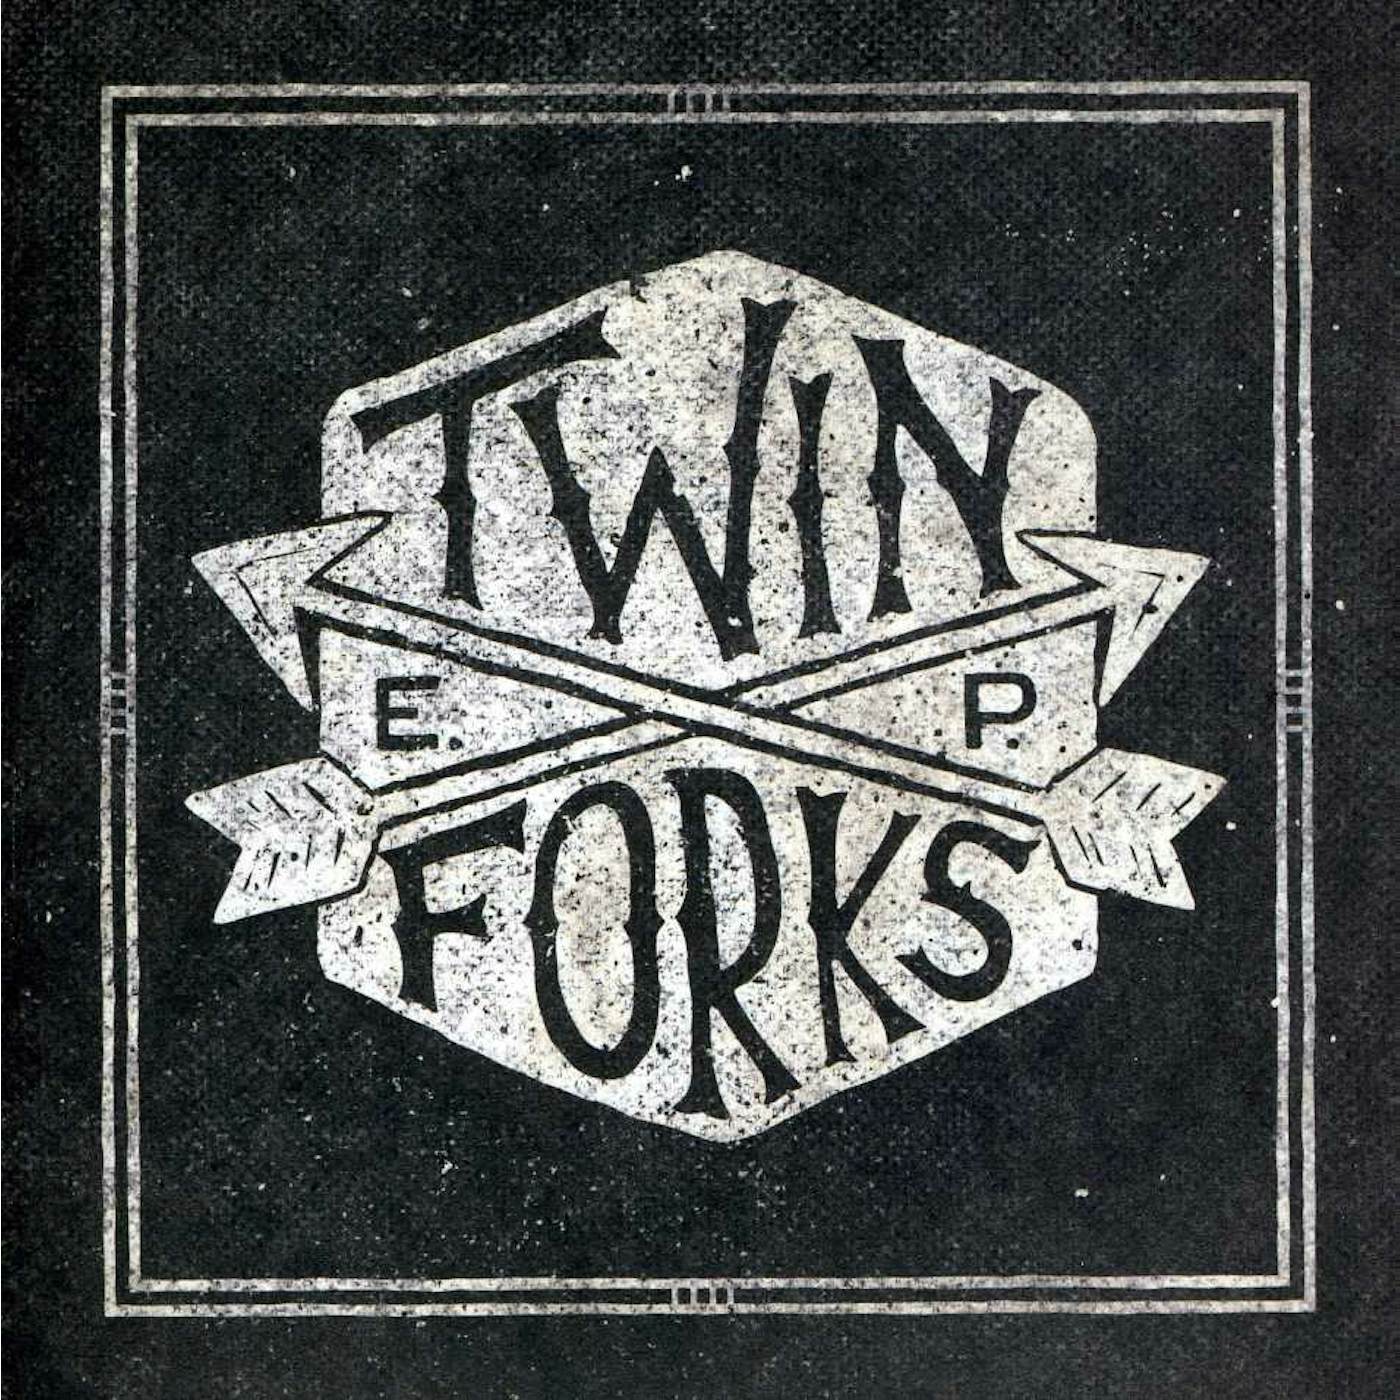 Twin Forks E.P. CD